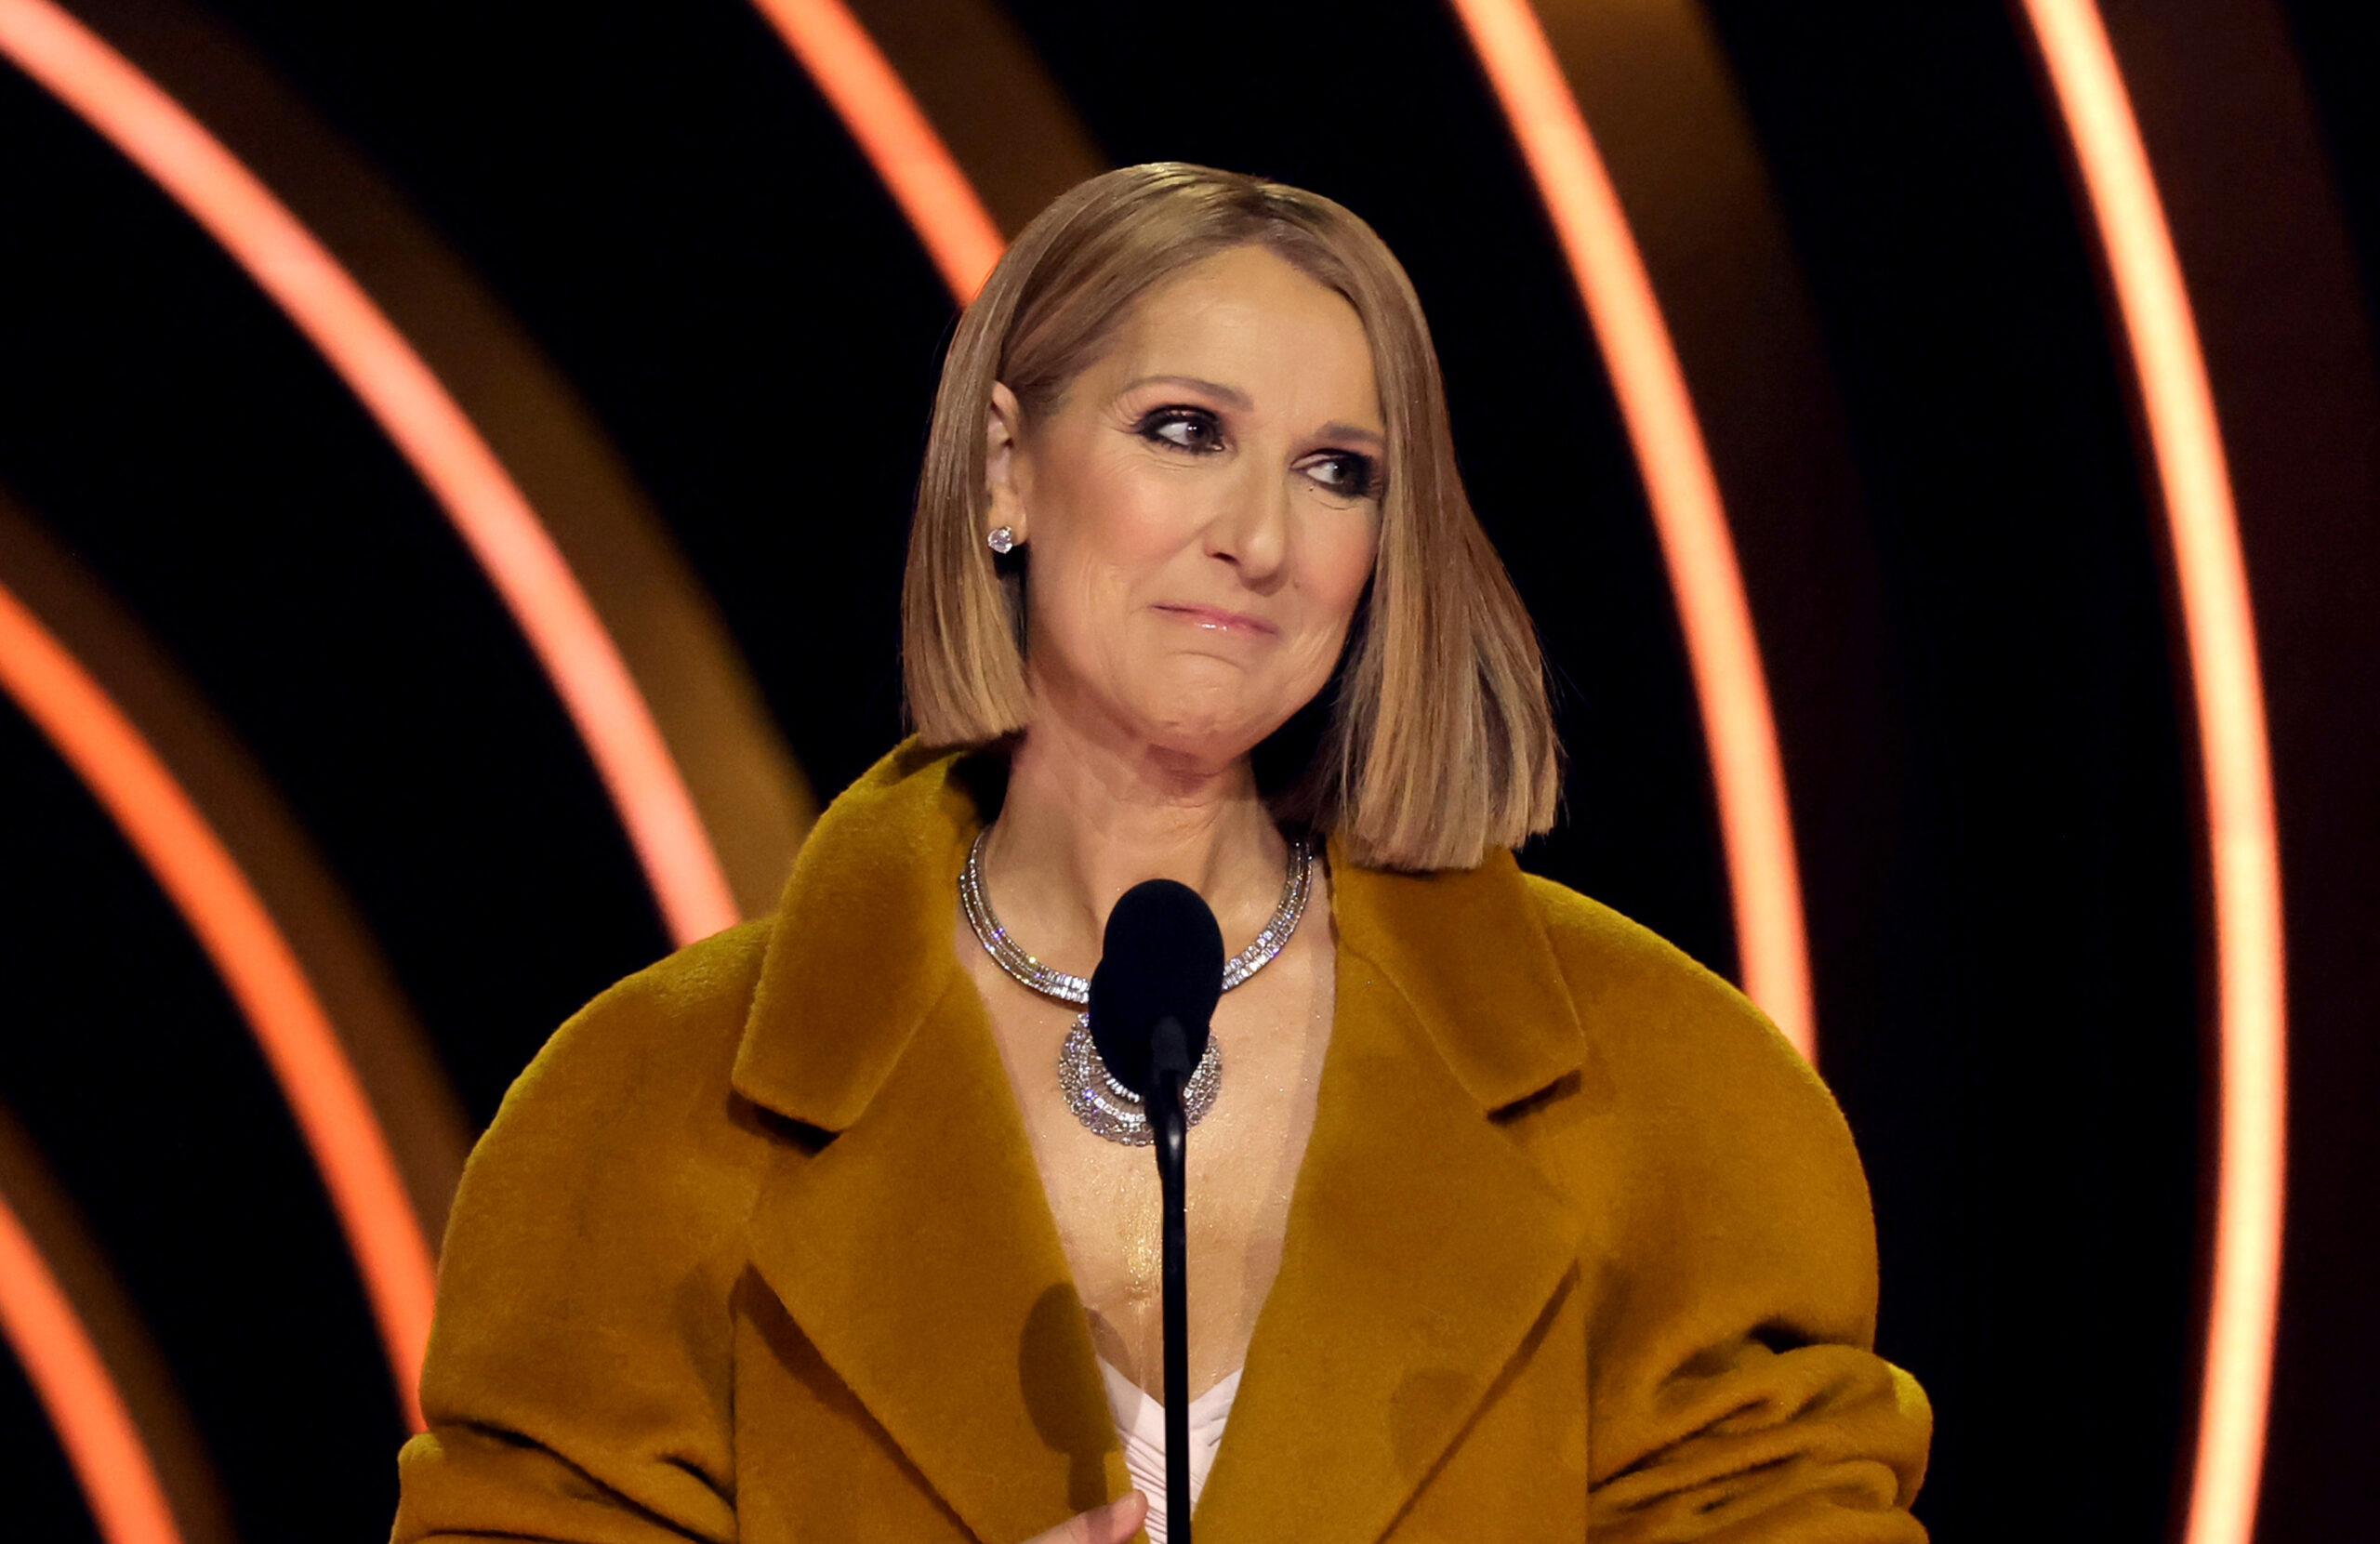 Celine Dion Reveals Stiff-Person Syndrome in New Documentary